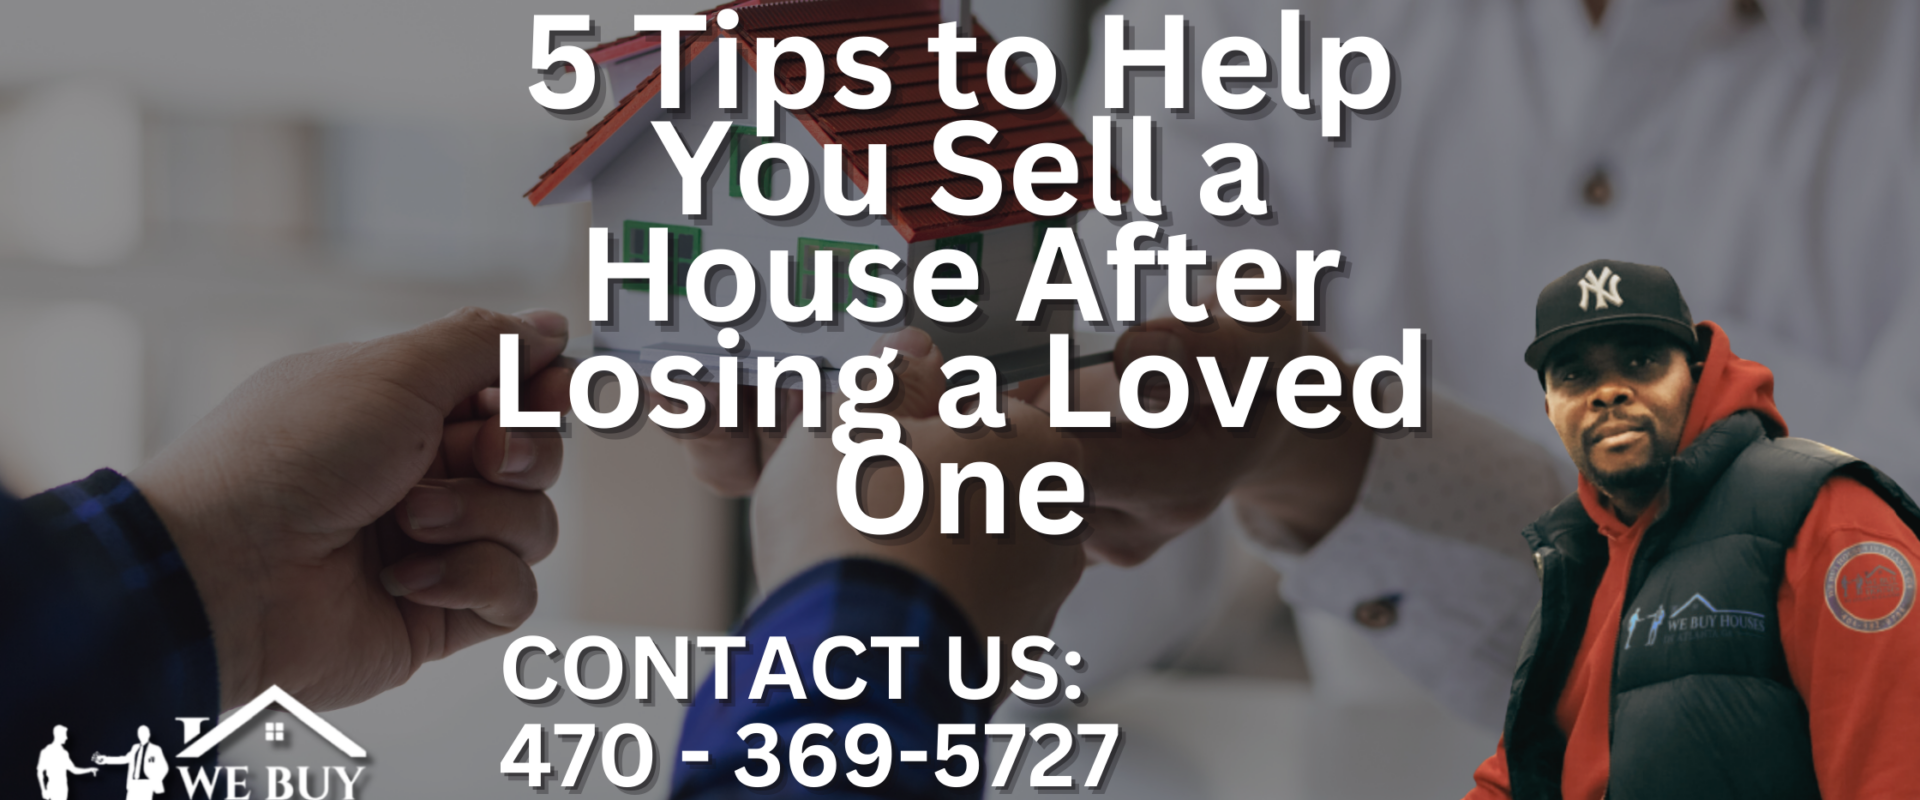 5-Tips-to-Help-You-Sell-a-House-After-Losing-a-Loved-One